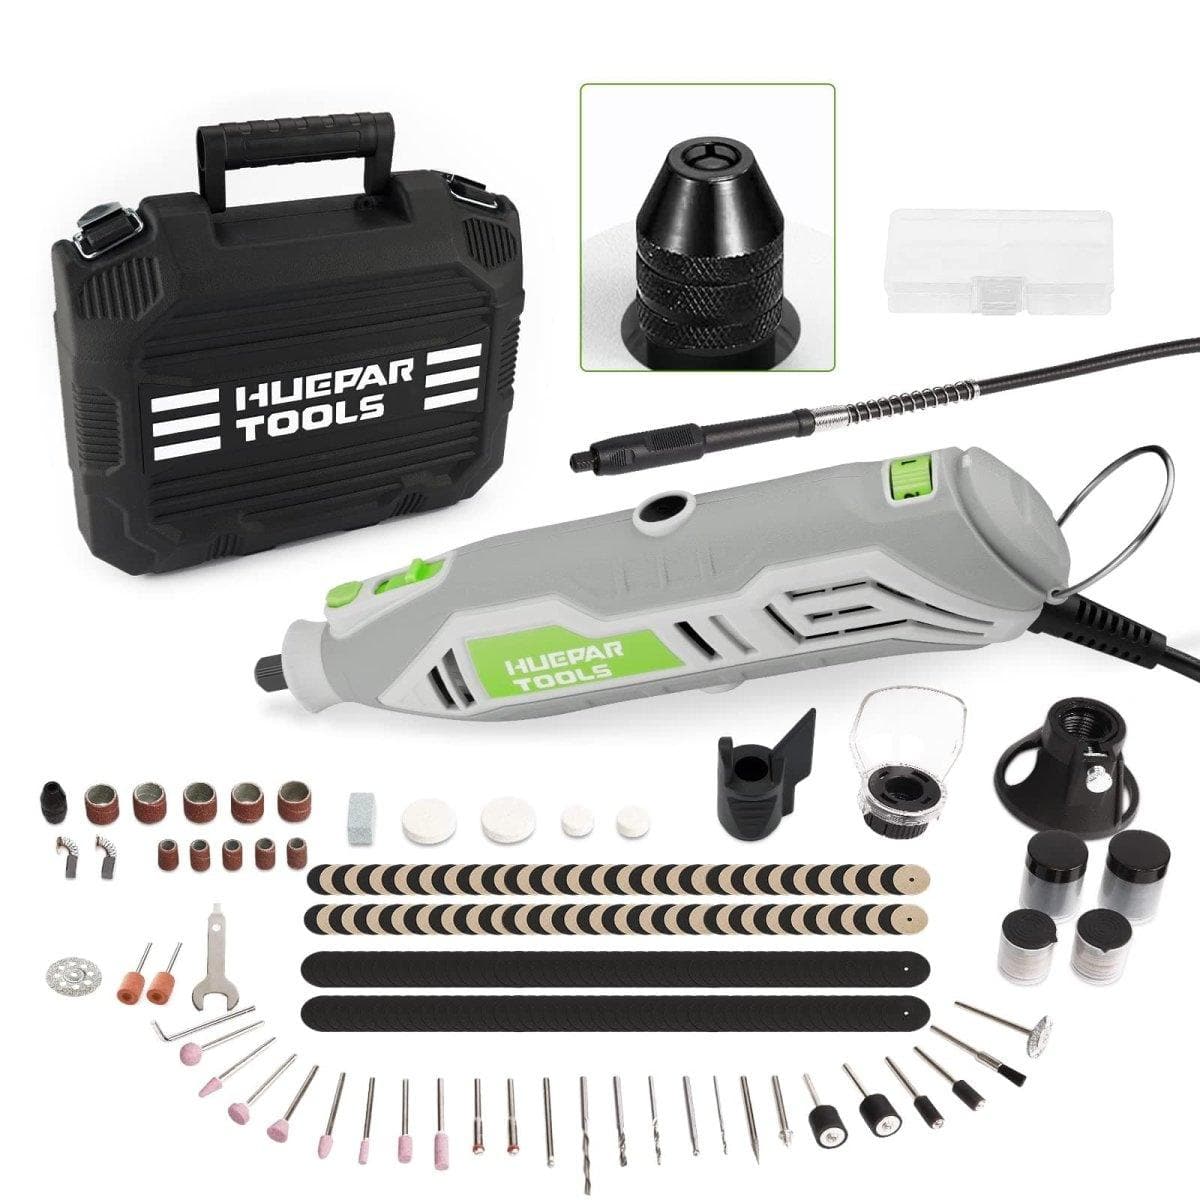 Huepar RT130 Rotary Tool Kit with Flex Shaft, 235pcs Accessories, MultiPro Keyless Chuck, and 6 Variable Speeds ranging from 10000-35000RPM for Crafting and DIY Projects7